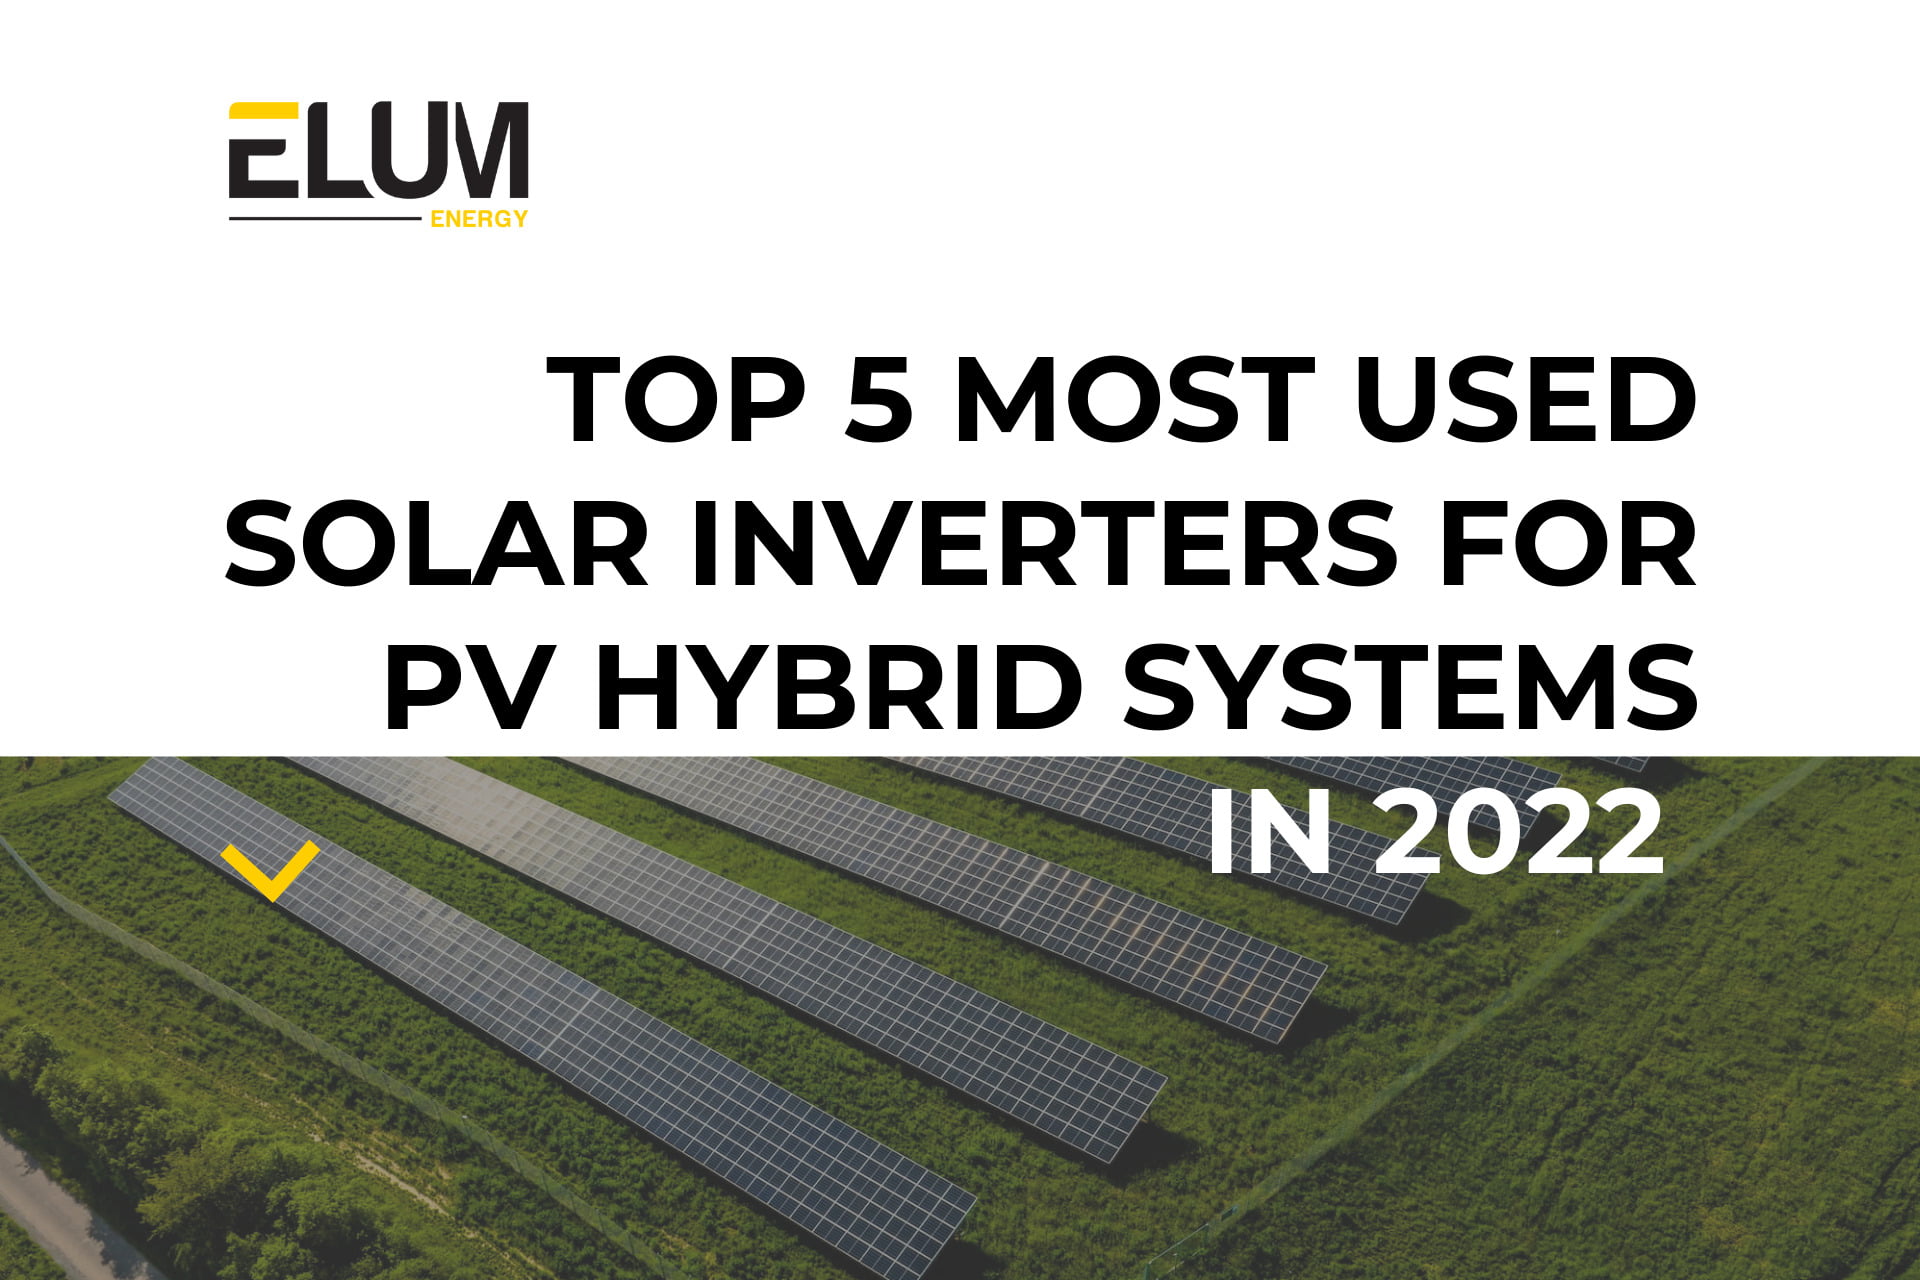 Top 5 Most Used Solar Inverters for PV Hybrid Systems in 2022 - Elum